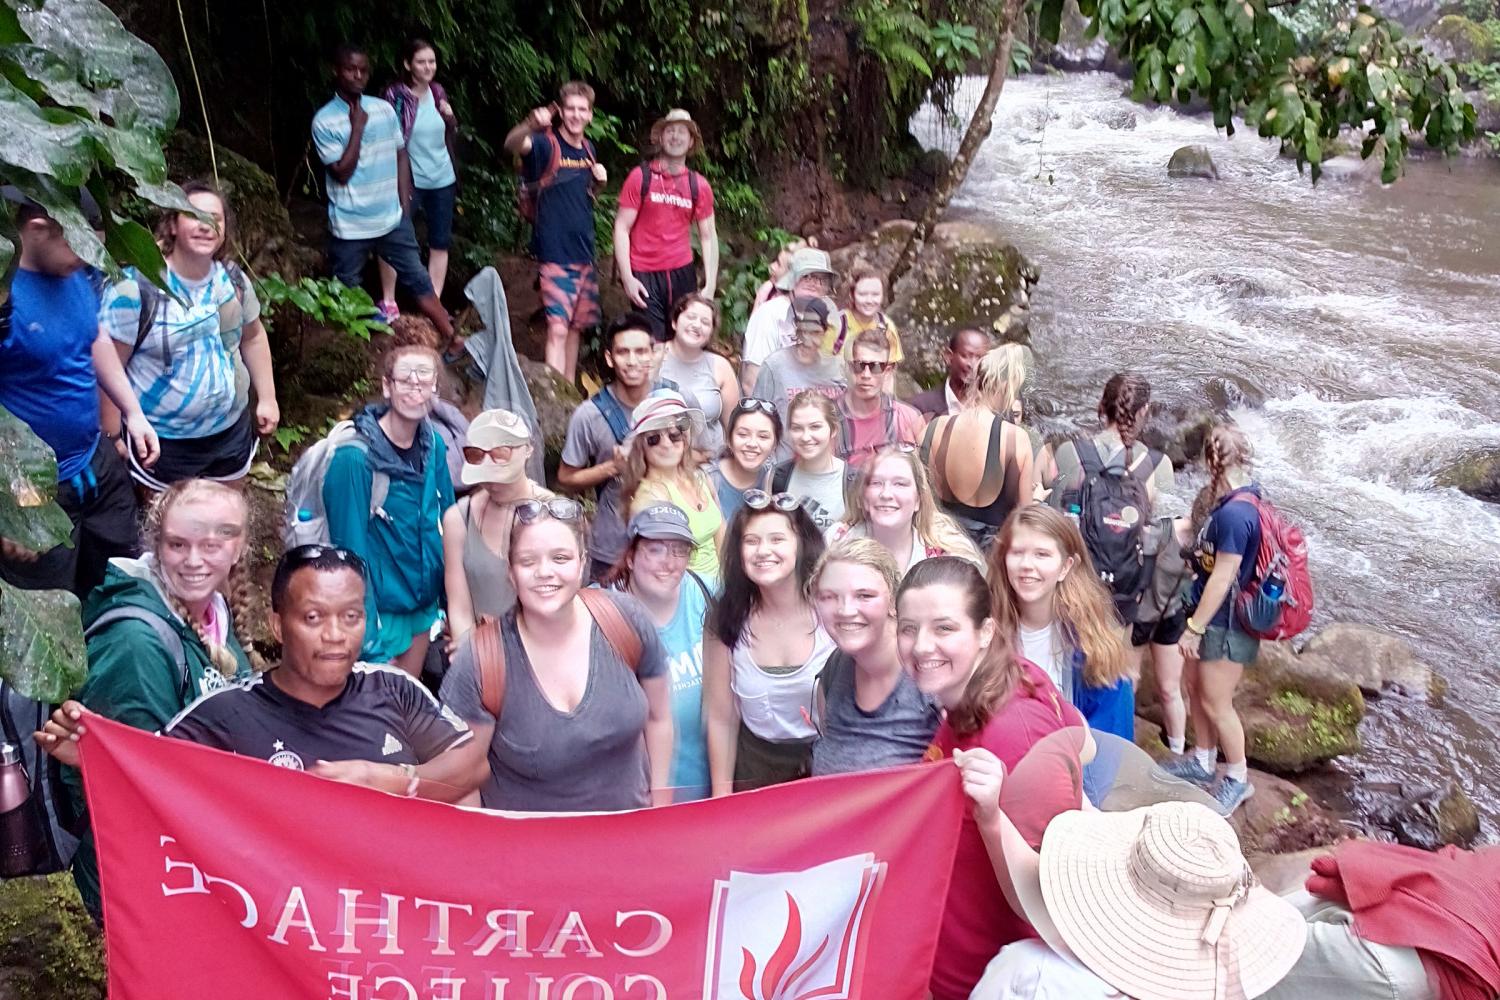 A group photo of students on the study tour to Tanzania.